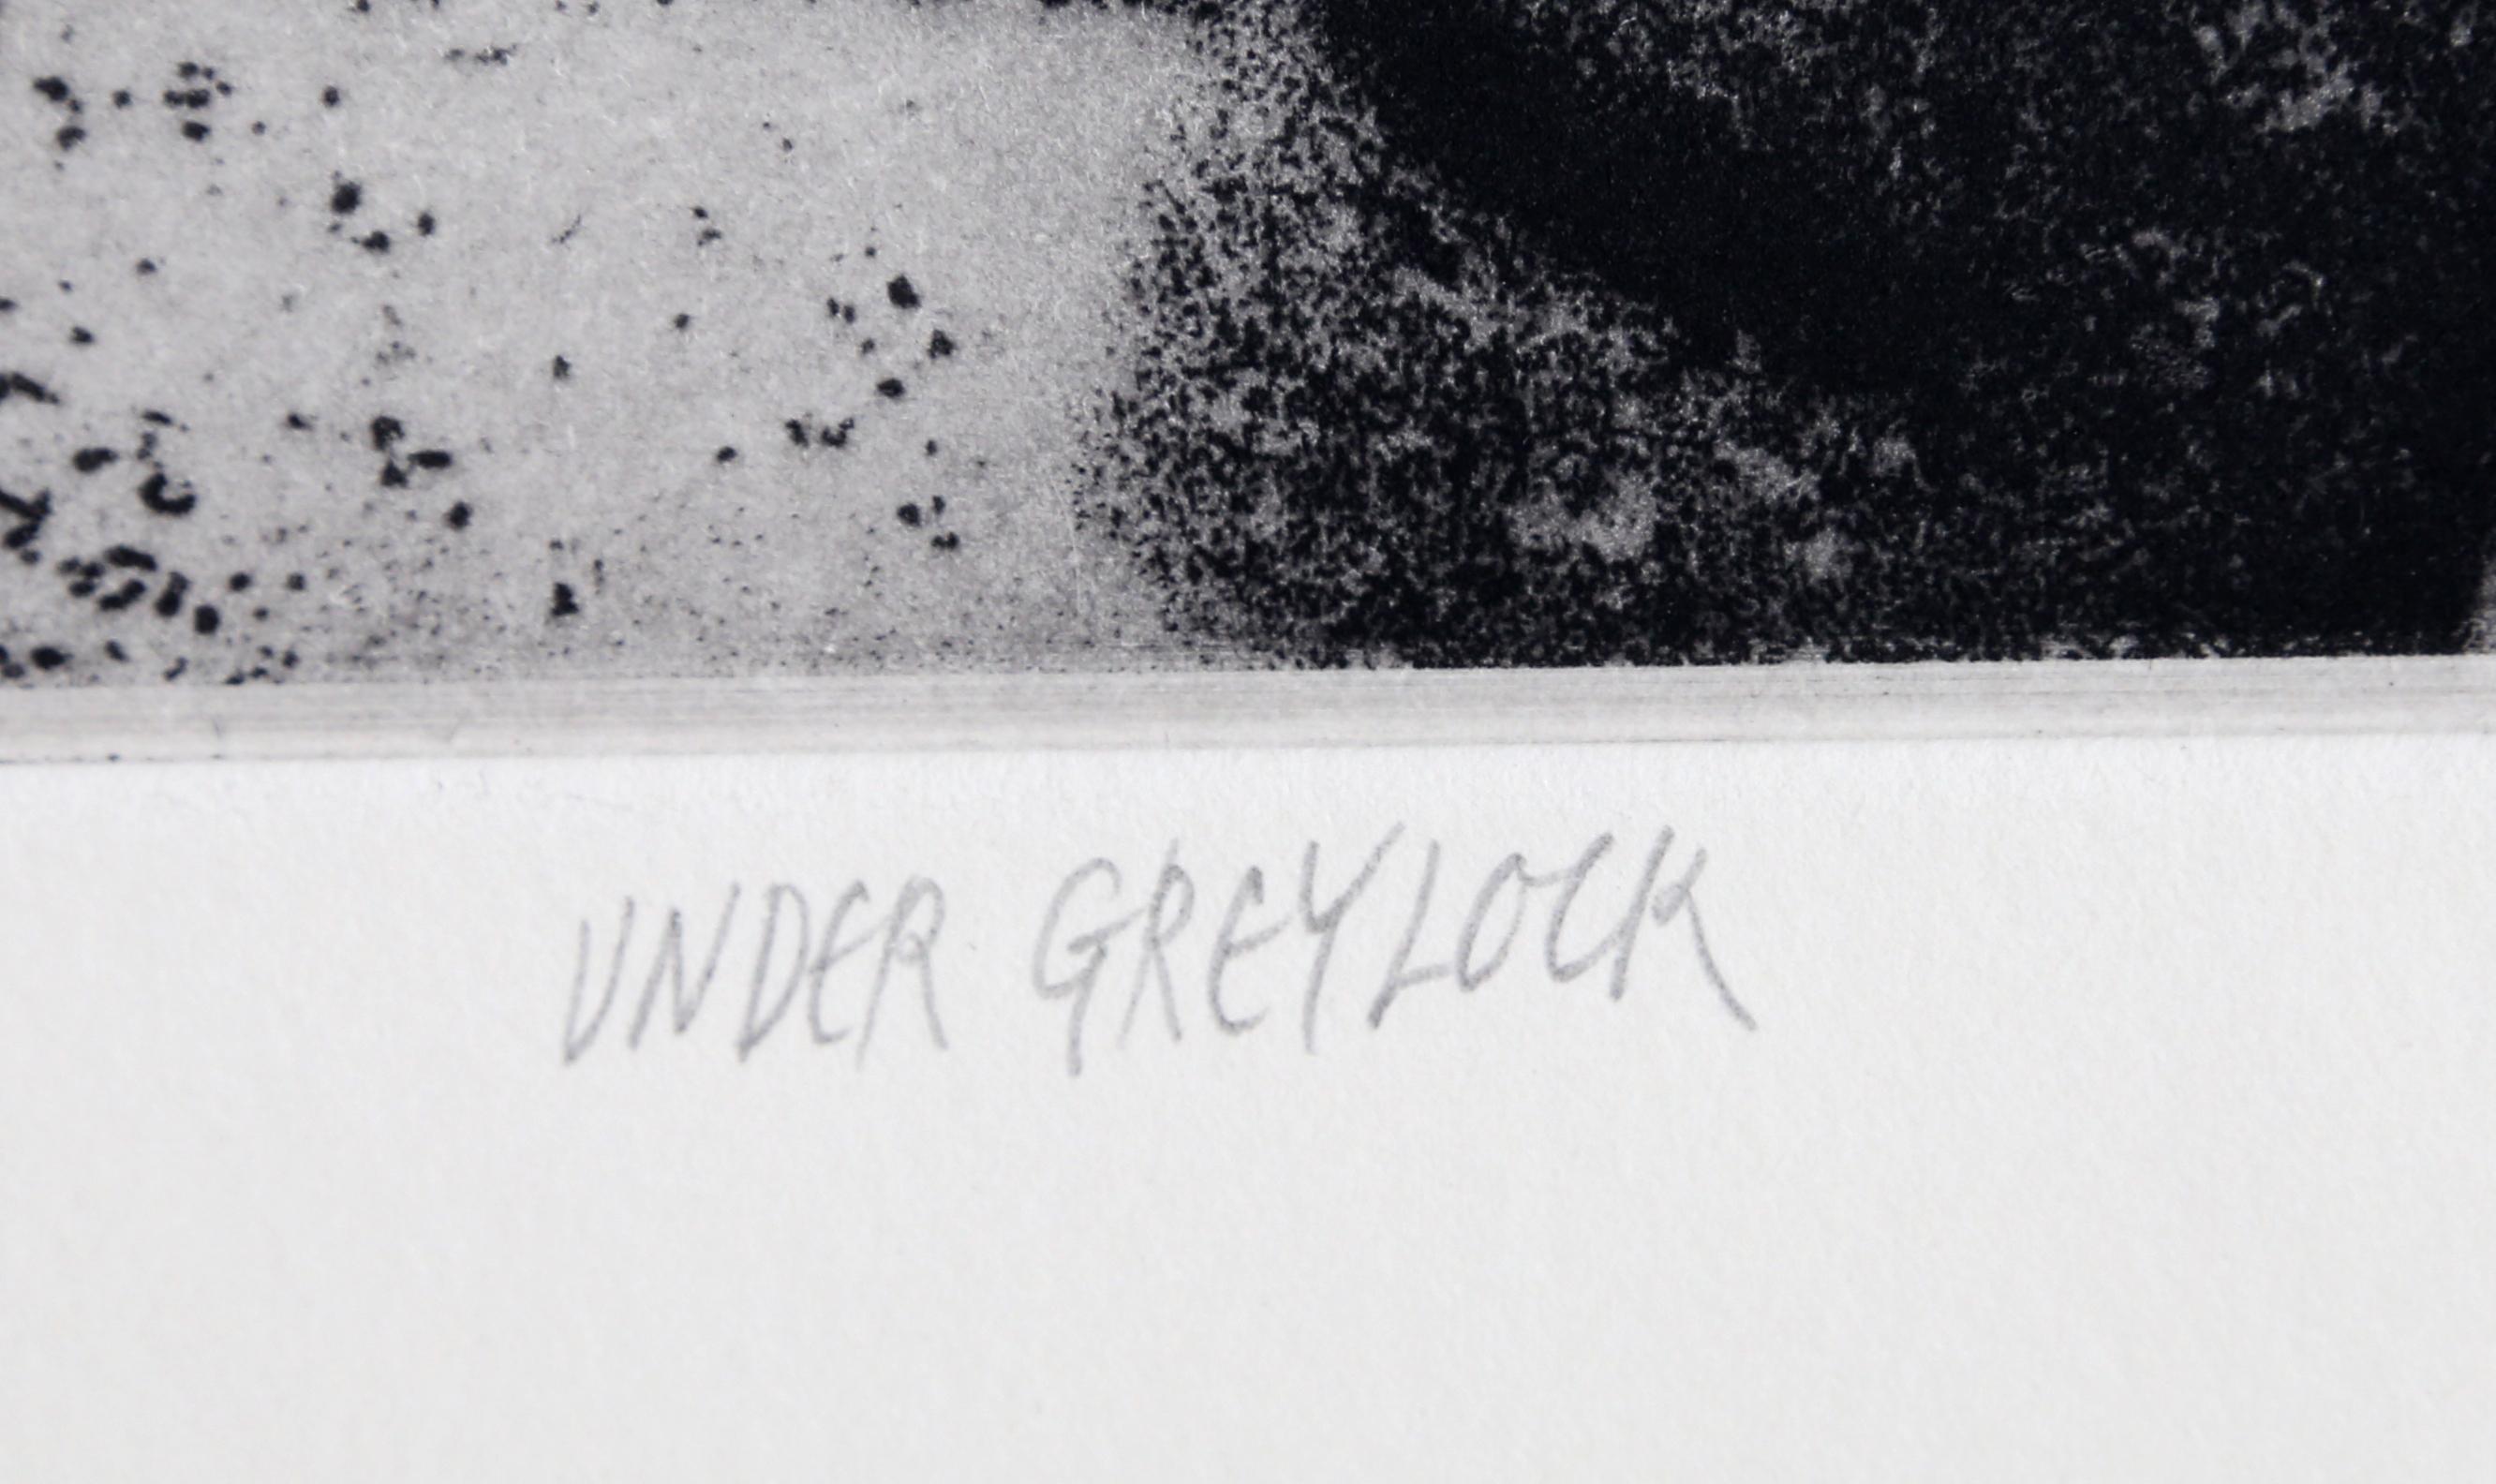 Under Greylock, Etching by Peter Milton For Sale 2